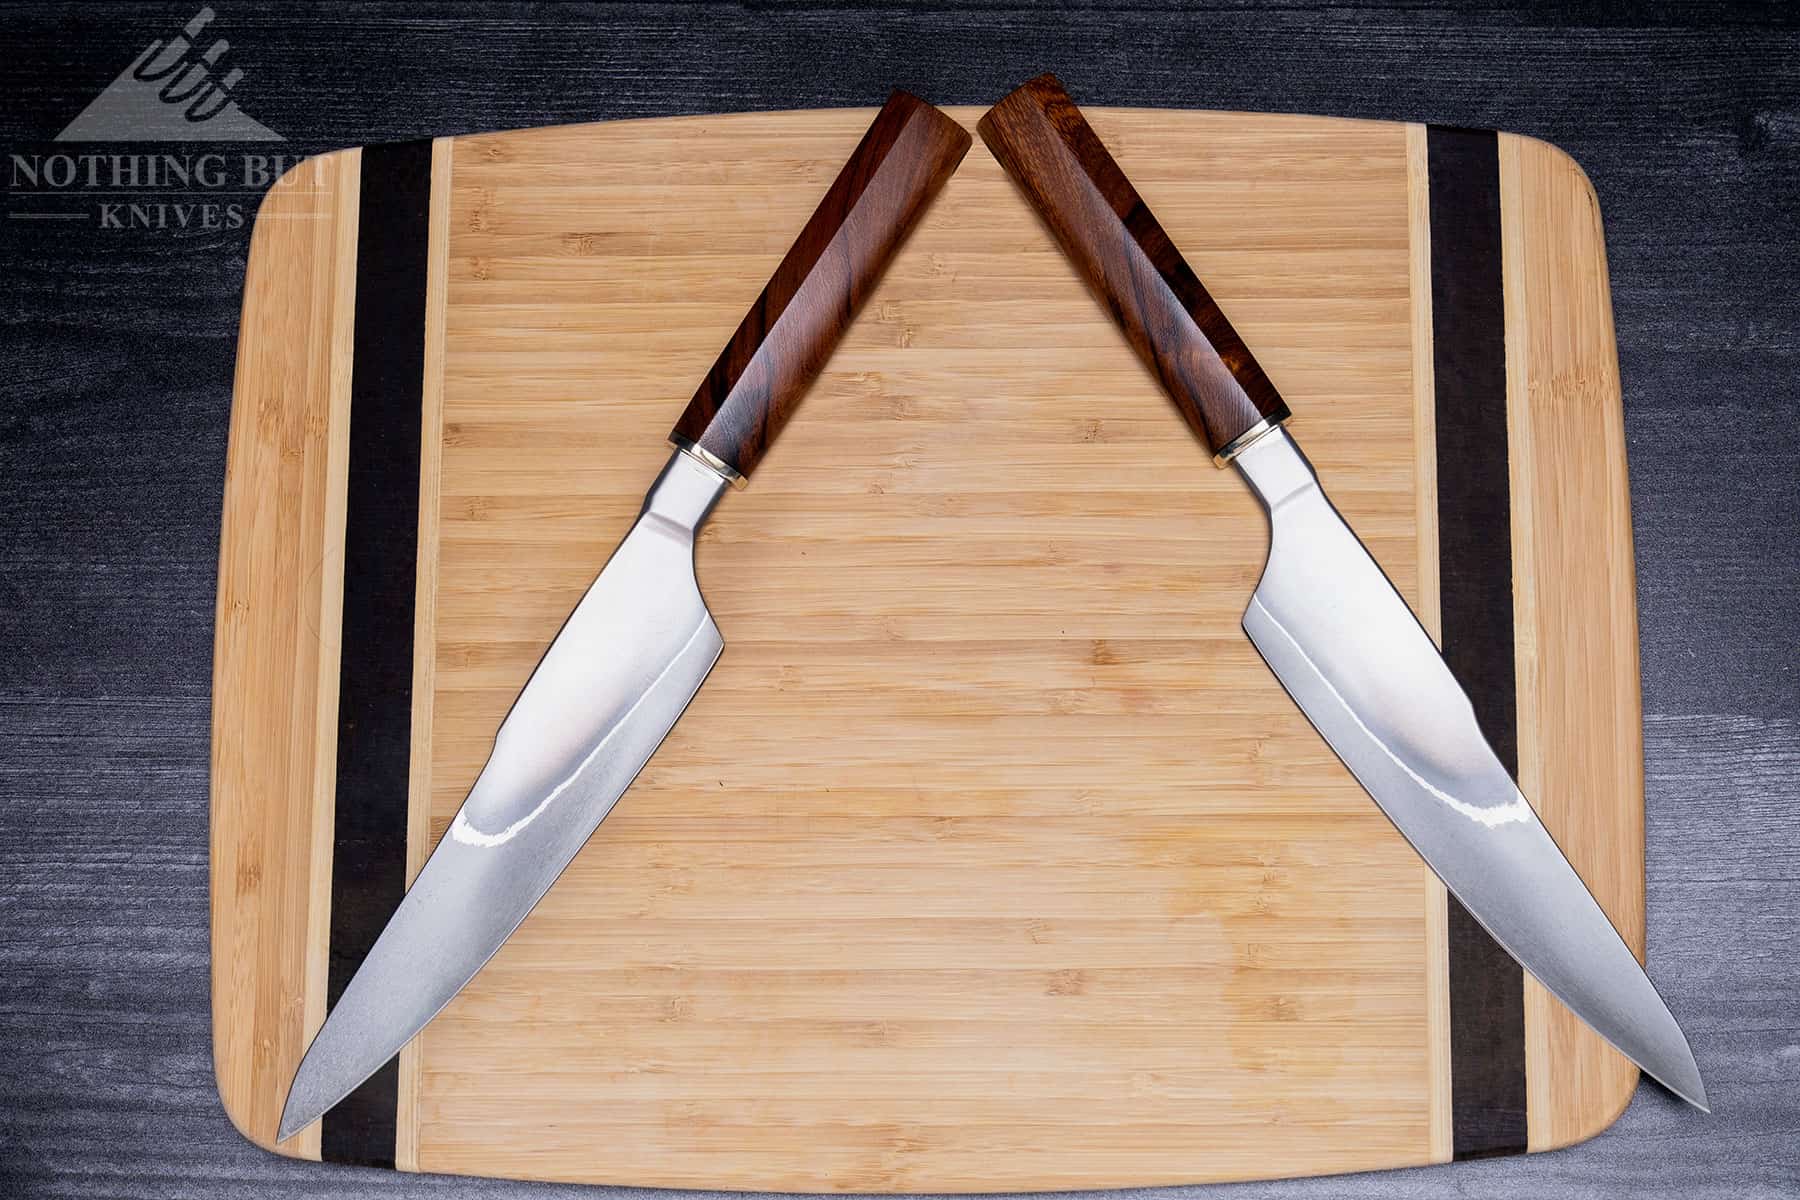 The Xin Cutlery XinCraft chef knife has great fit and finish. 